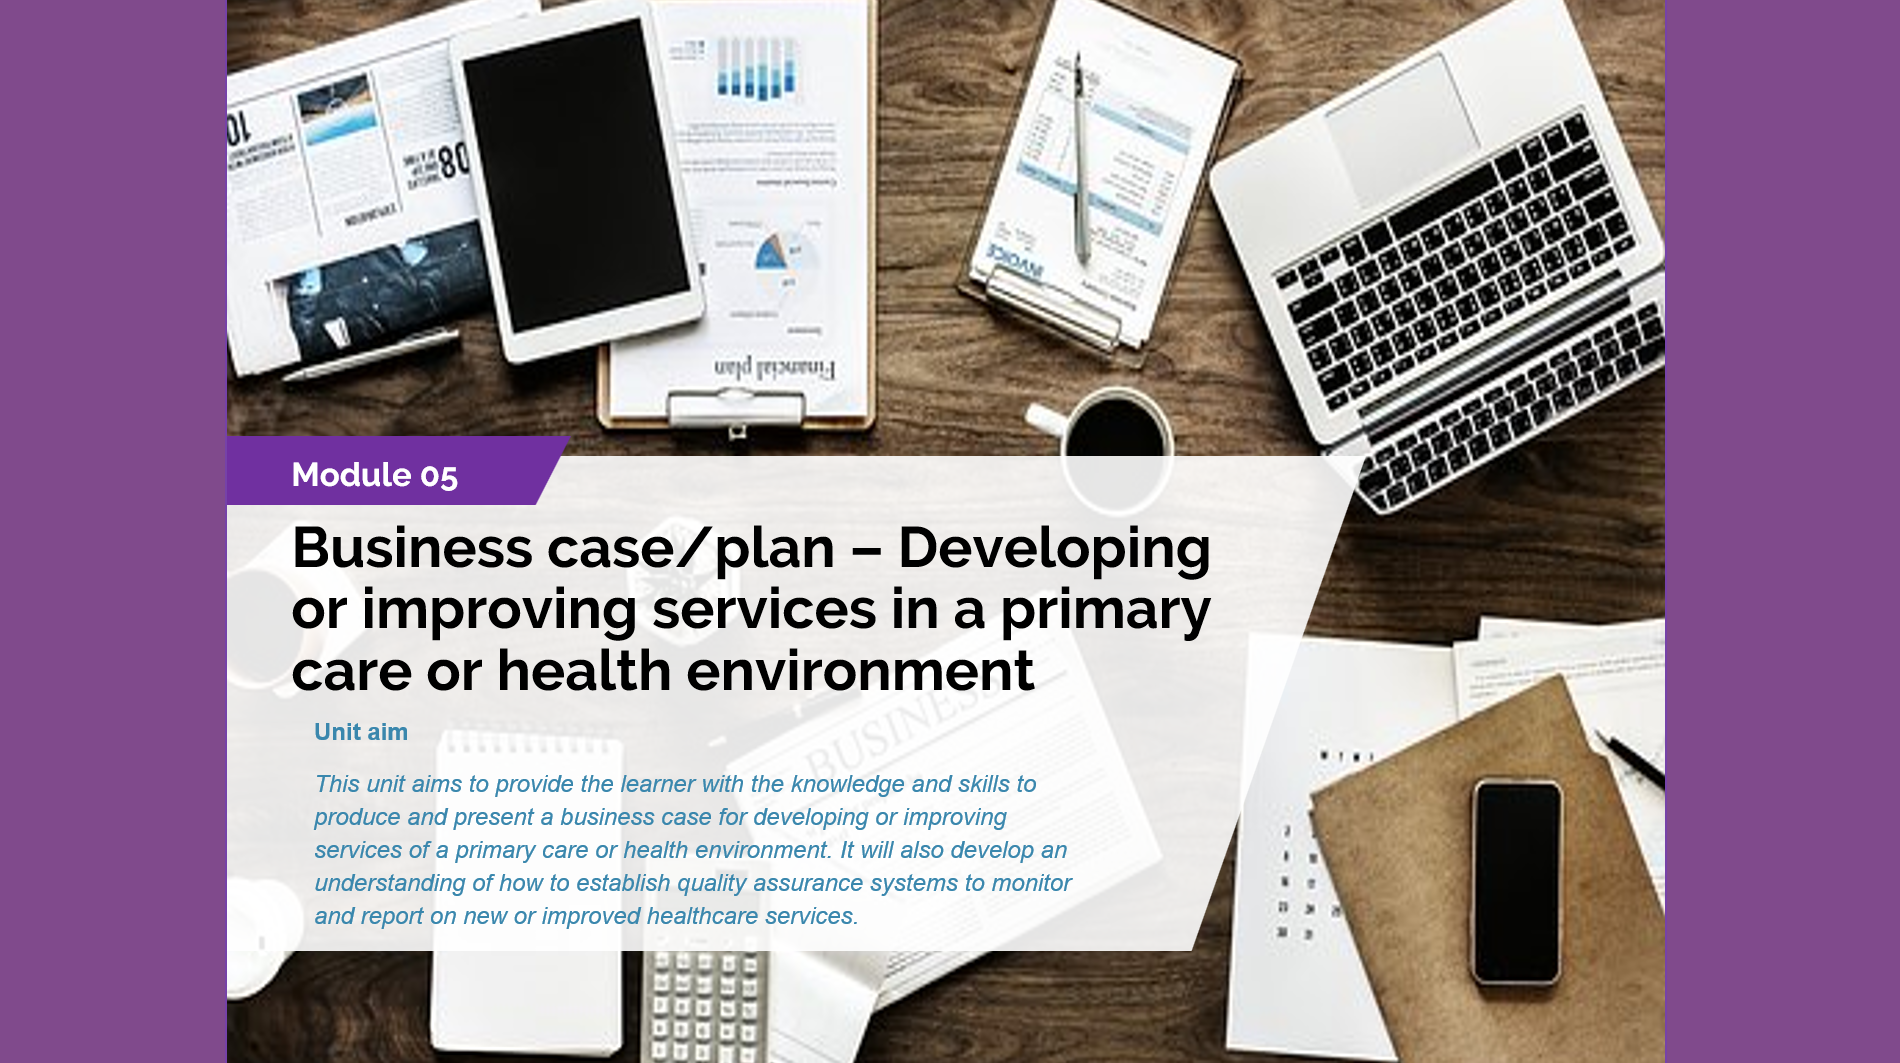 Level 5 AMSPAR Business Plan / Business Case - Developing or improving services in a primary care or health environment